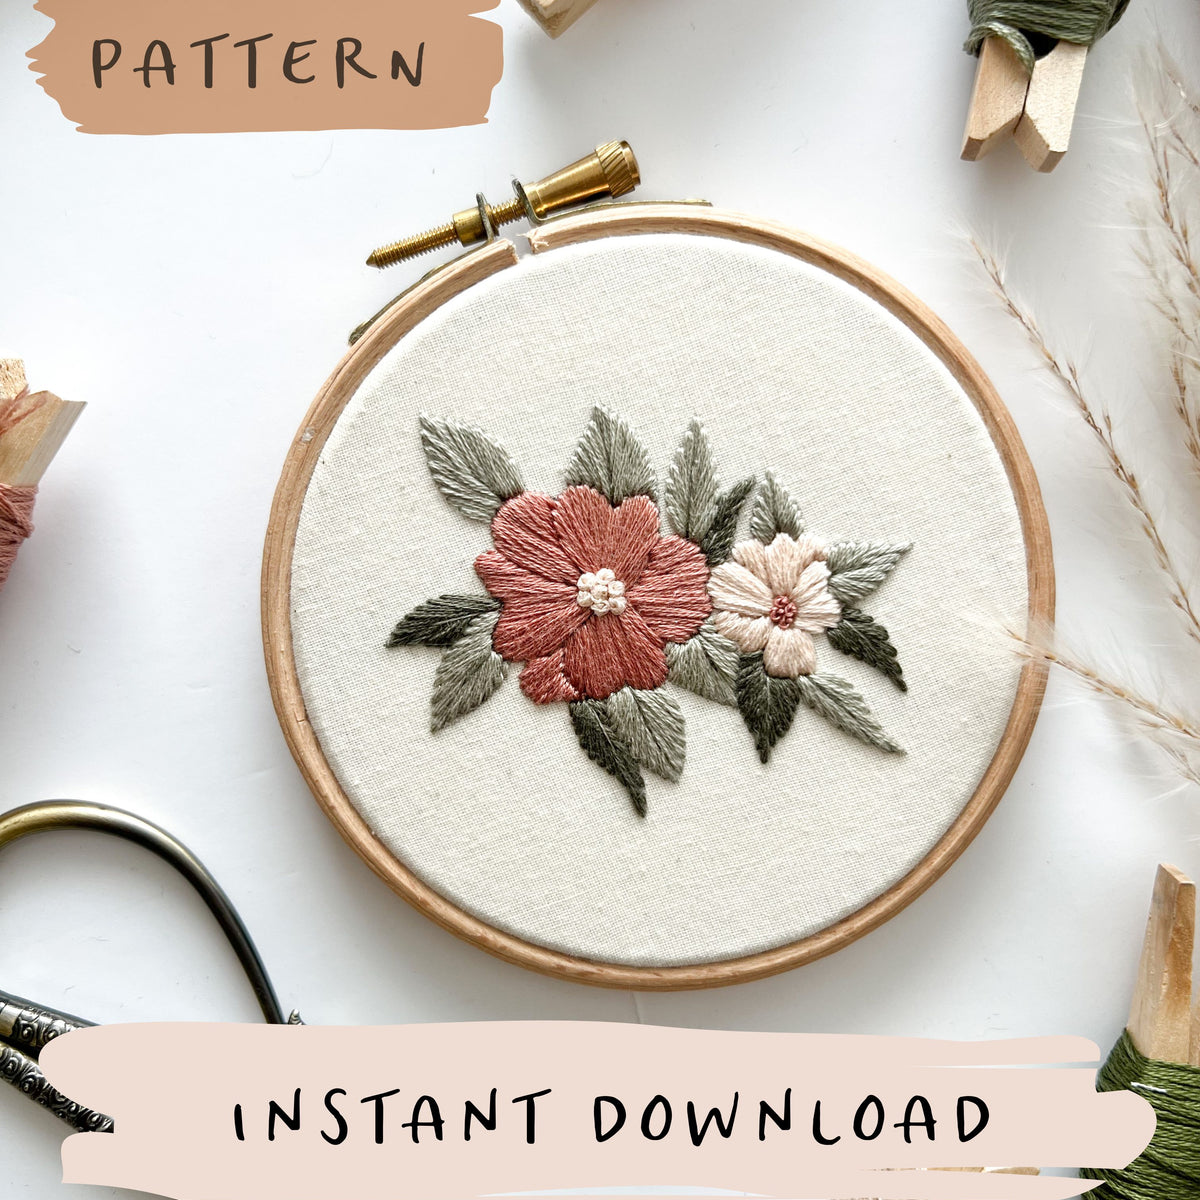 White Roses Intermediate Hand Embroidery Kit